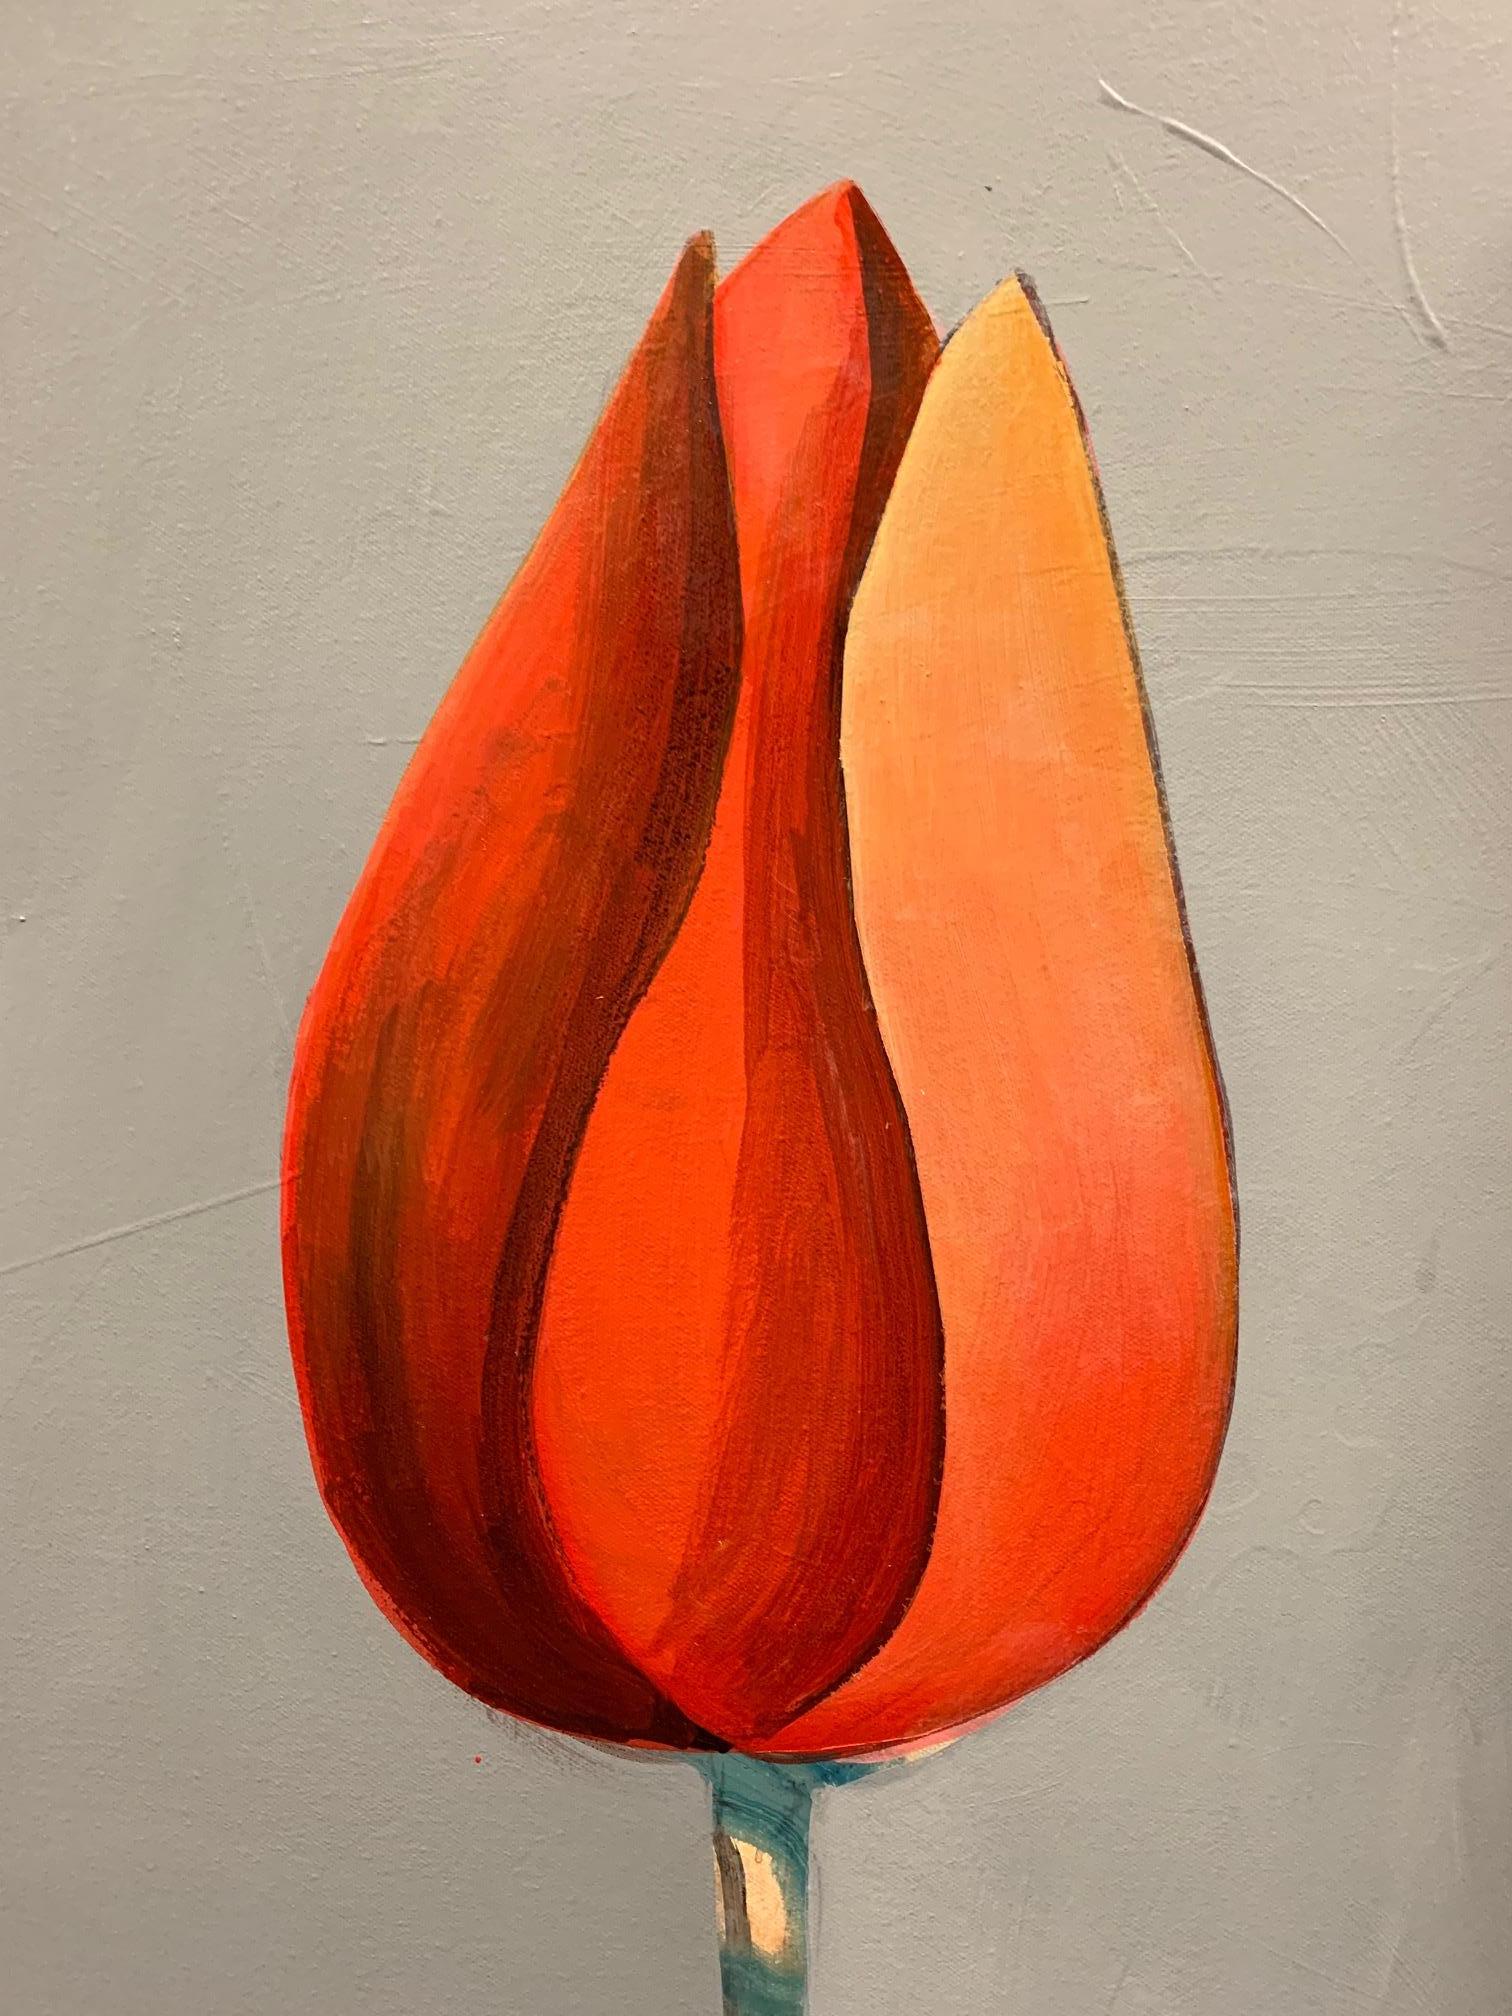 This contemporary, abstract, work by Fiona Ackerman, depicts an abstract study of the Tulip flower in relation to 17th and 18th botanical research illustrations.

Fiona Ackerman’s work is diverse in style, it is deeply rooted in the practice of